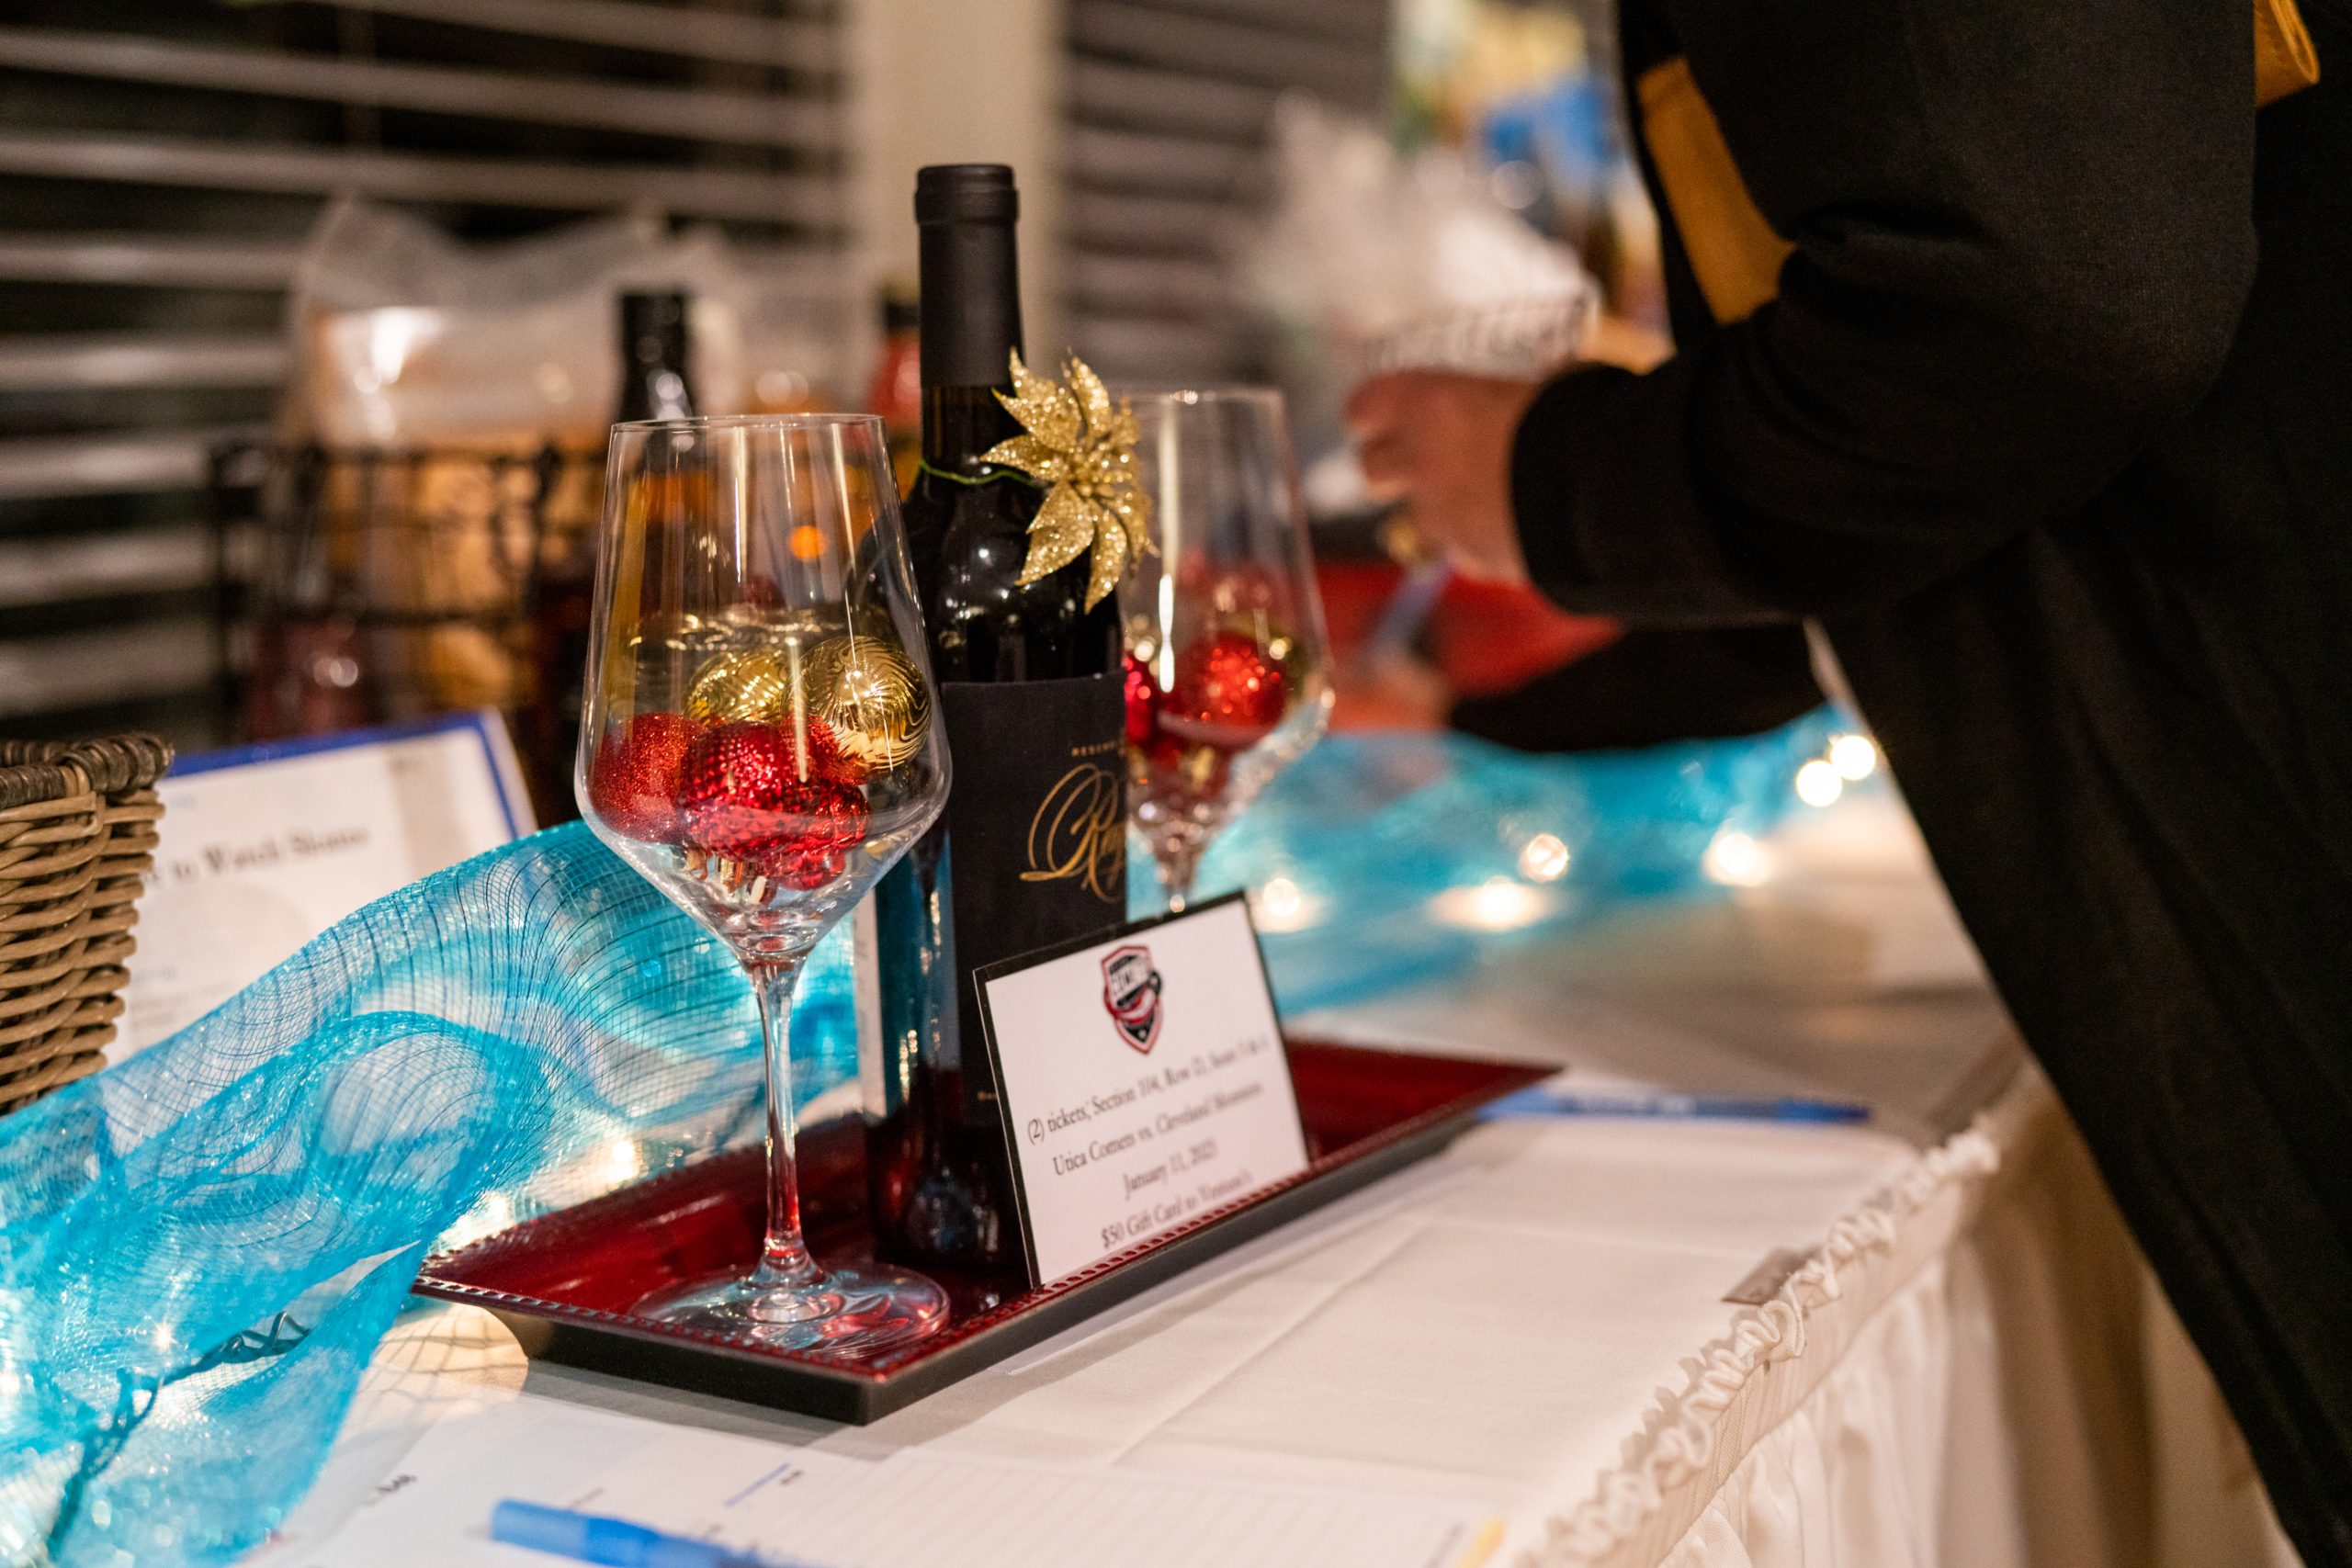 THE 20TH ANNUAL AUCTION & DINNER EVENT TO RAISE FUNDS FOR THE NEIGHBORHOOD CENTER, INC.